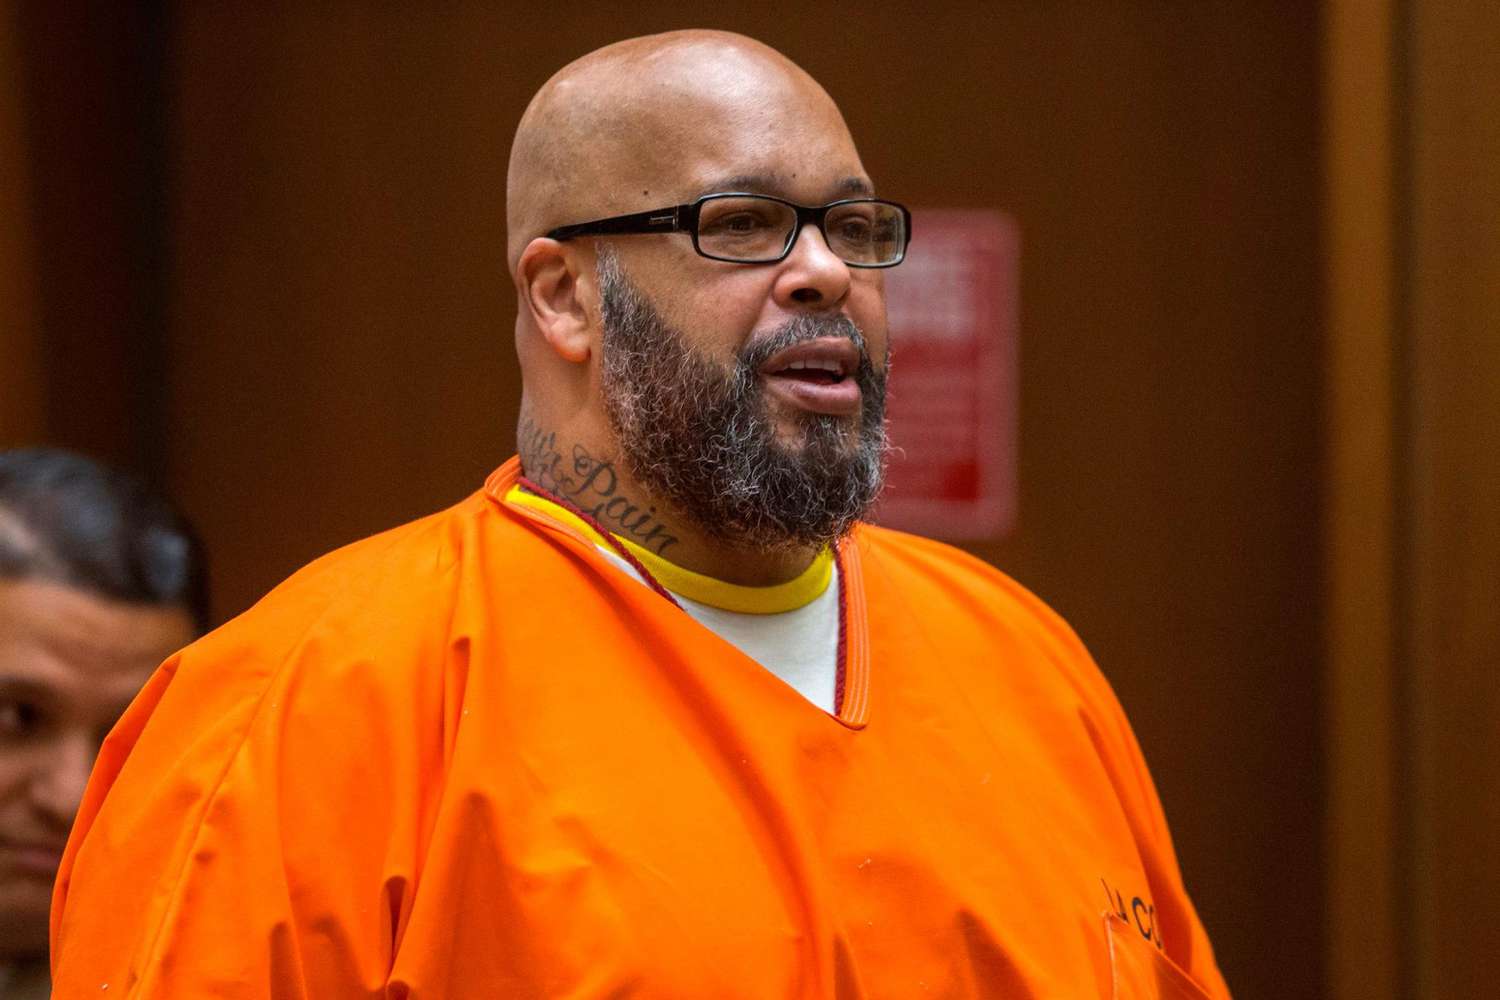 Suge Knight Denies Involvement In Fake Social Media Posts, Including Alleged Disparagement Of Snoop Dogg